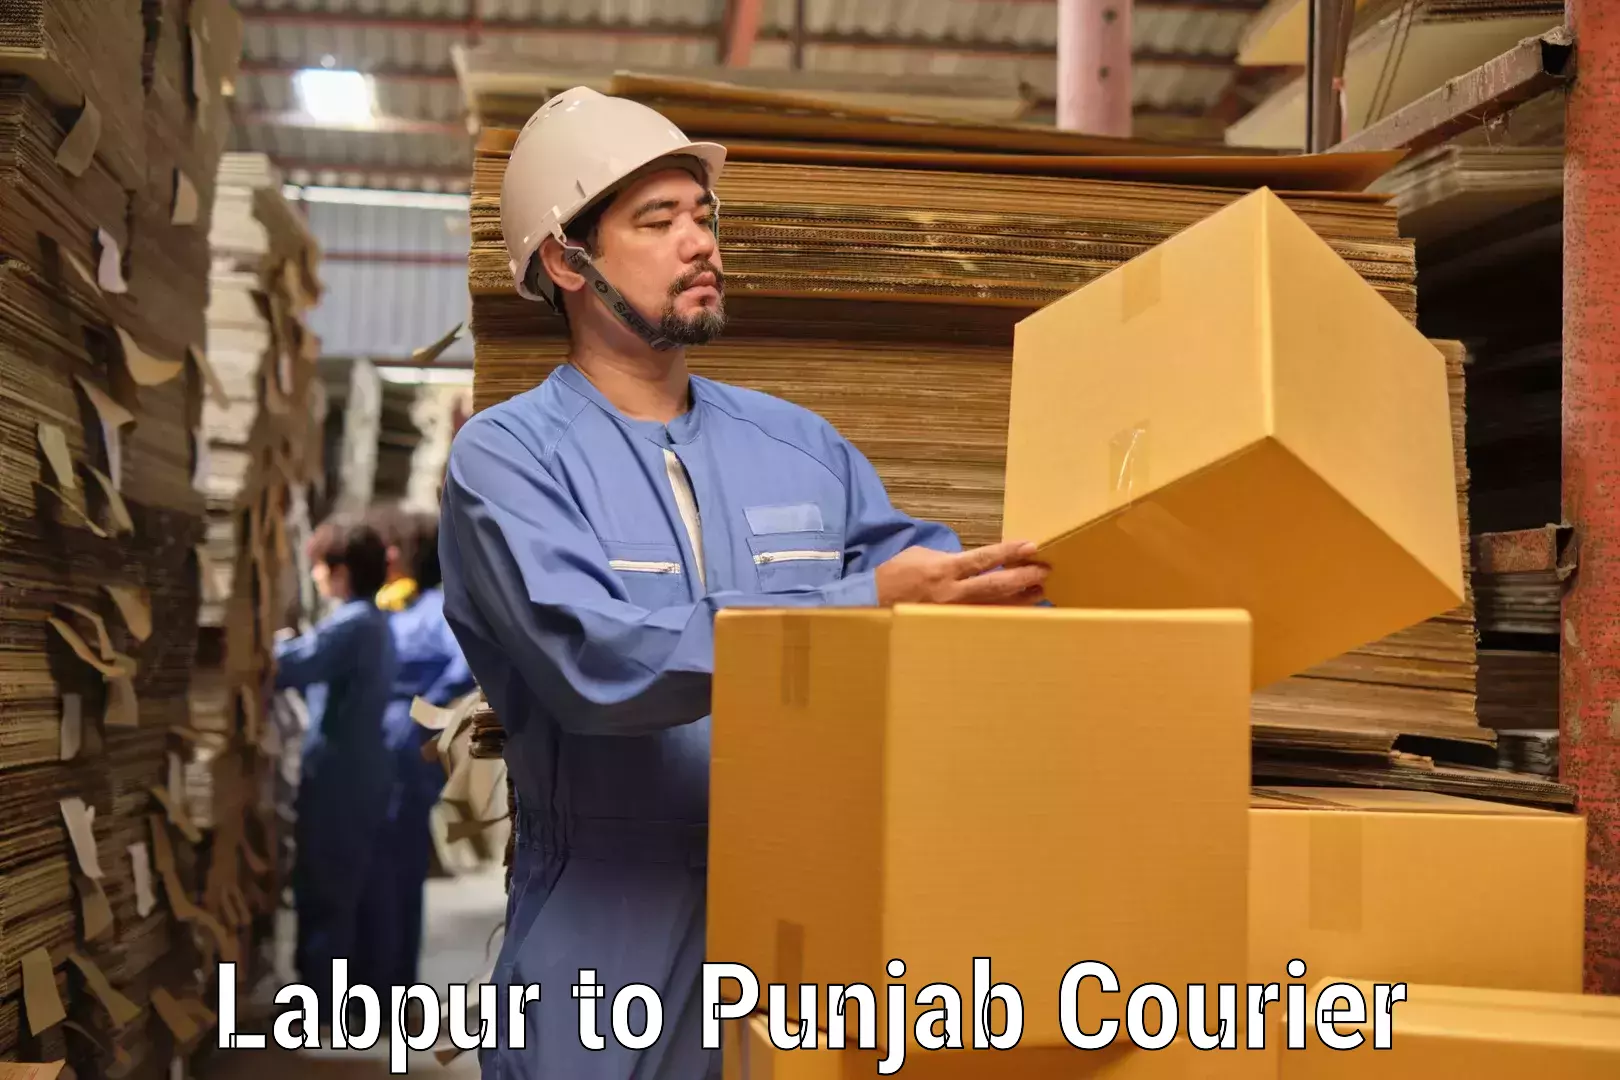 Express delivery capabilities Labpur to Nawanshahr